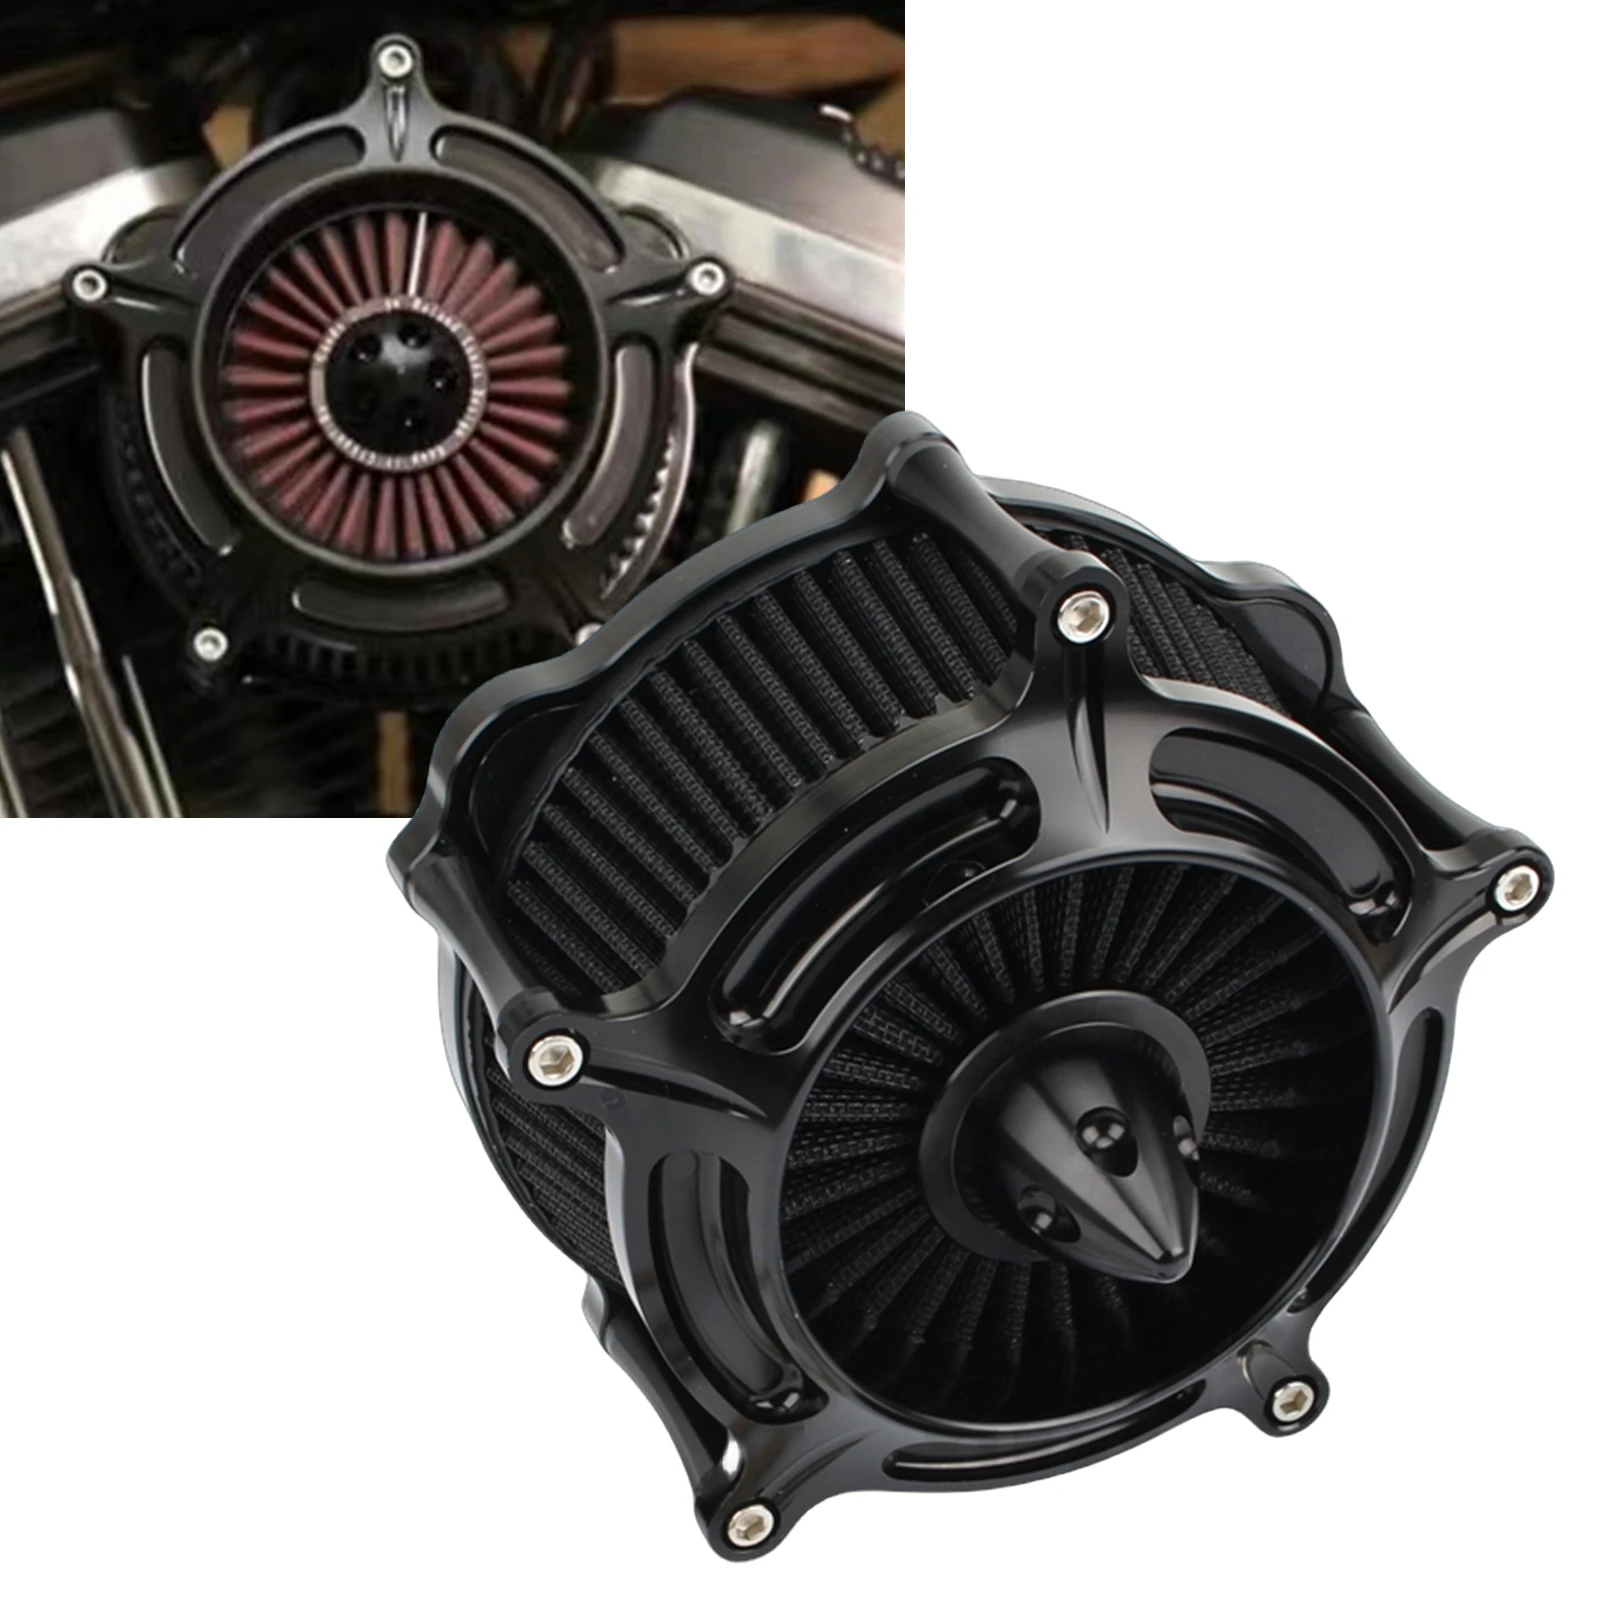 

For Harley Dyna FXDLS Softail Touring Trike FLSTNSE FLSTSE FXSBSE Motorcycle Air Cleaner Intake Filter Cover